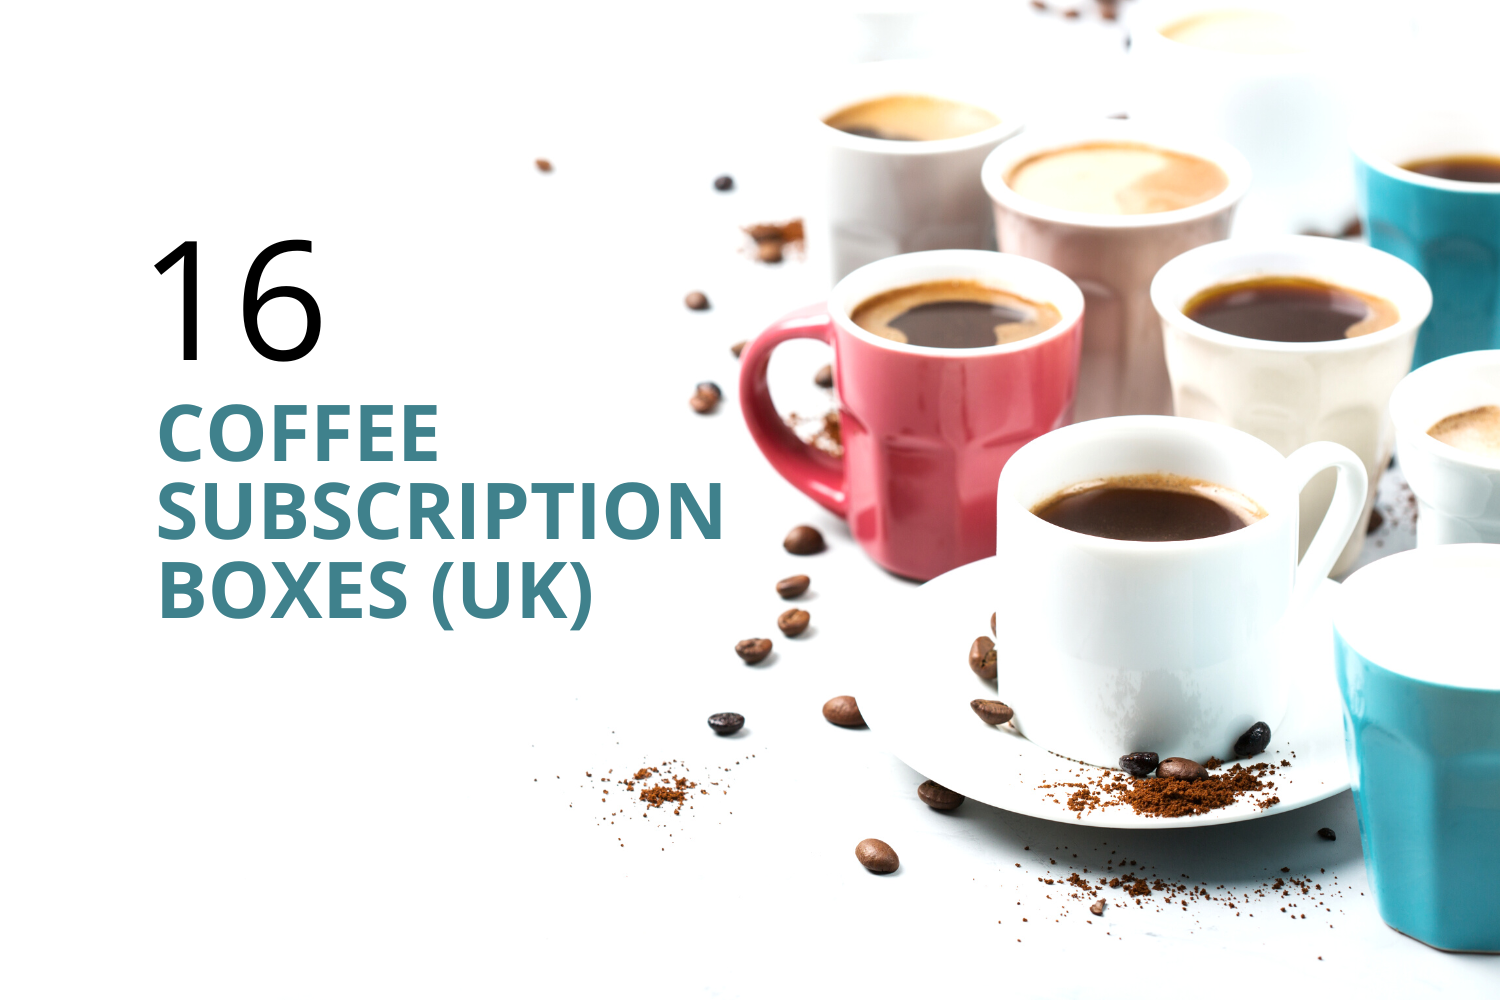 coffee mugs with text overlay 16 coffee subscription boxes (UK)